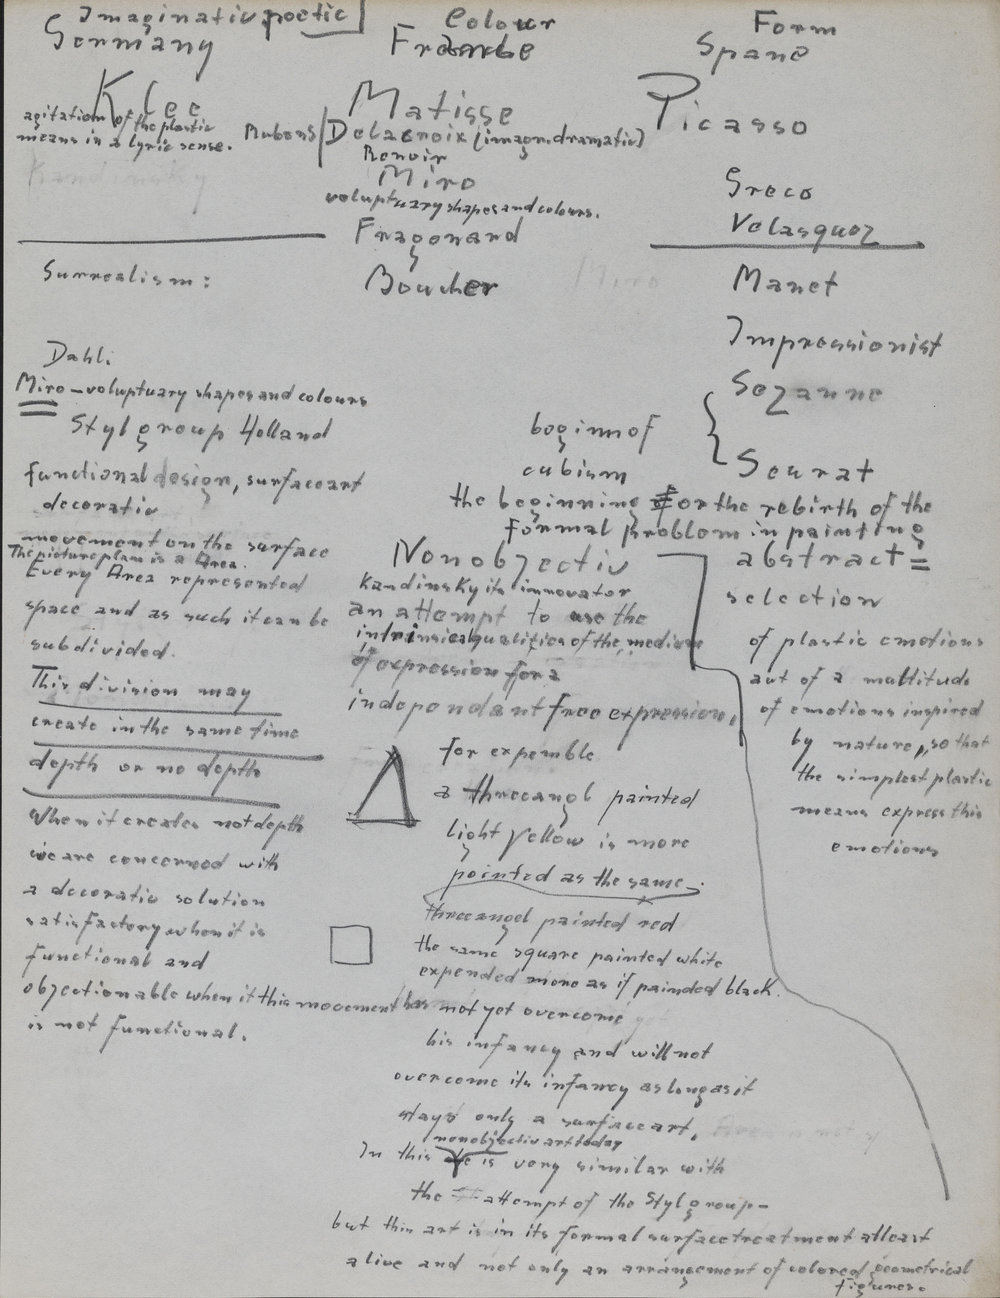  Abb. 1 Hans Hofmann, Provincetown Lectures manuscript »Laws of the Picture Plane« and »Tensions«, S. 34, Hans Hofmann papers, [circa 1904]-2011, bulk 1945-2000. Archives of American Art, Smithsonian Institution, ©Artists Rights Society (ARS) 